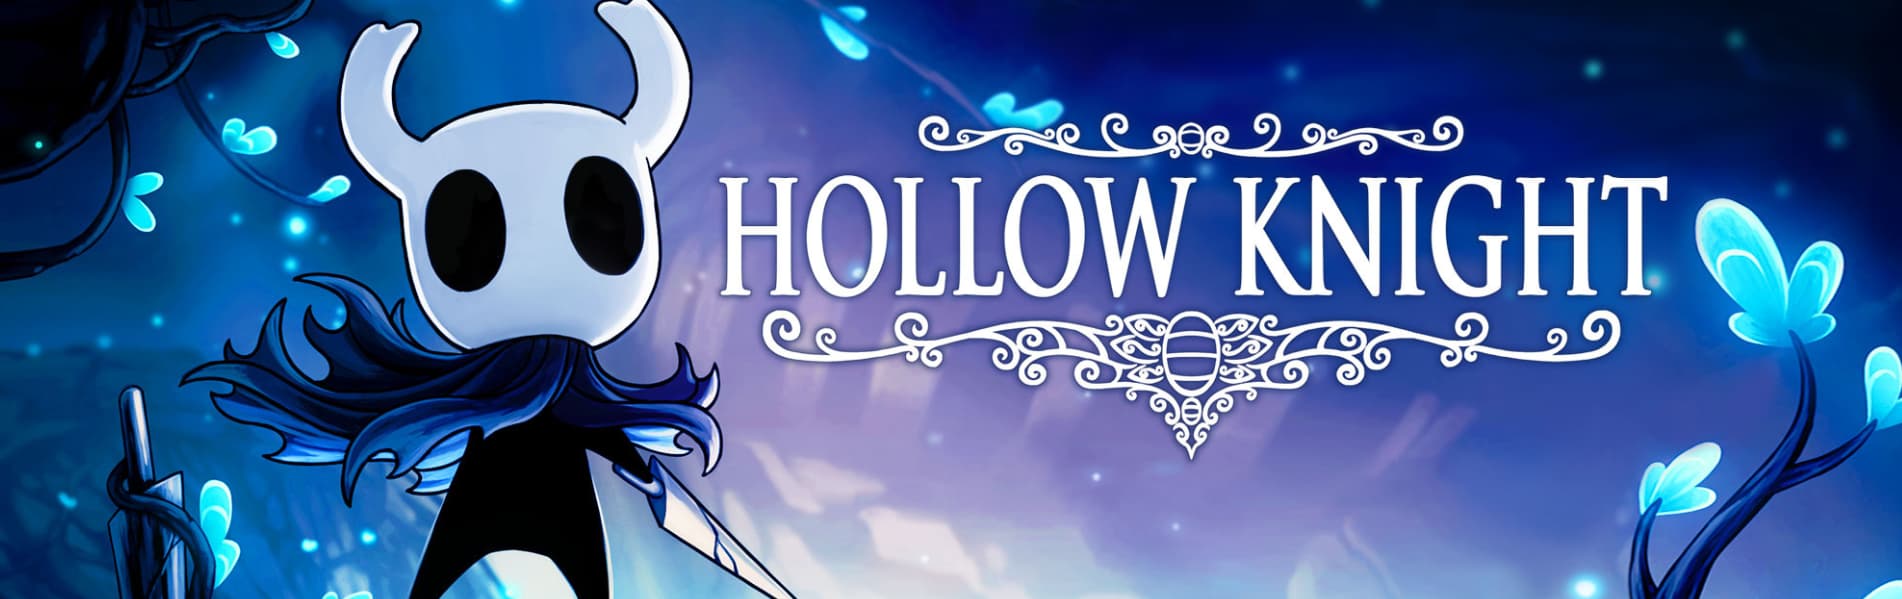 Hollow Knight Store Banner 2